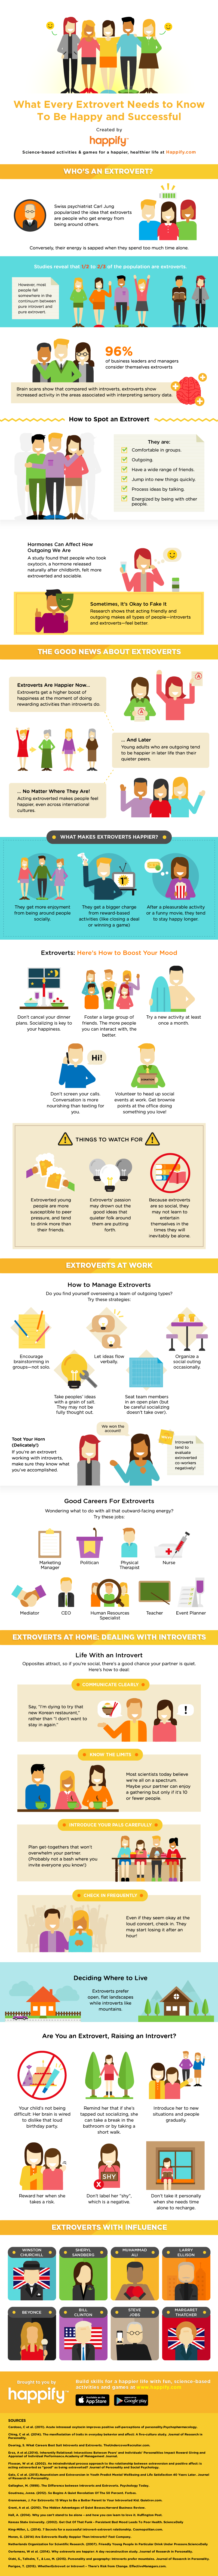 extrovert-guide-happiness-infographic.png